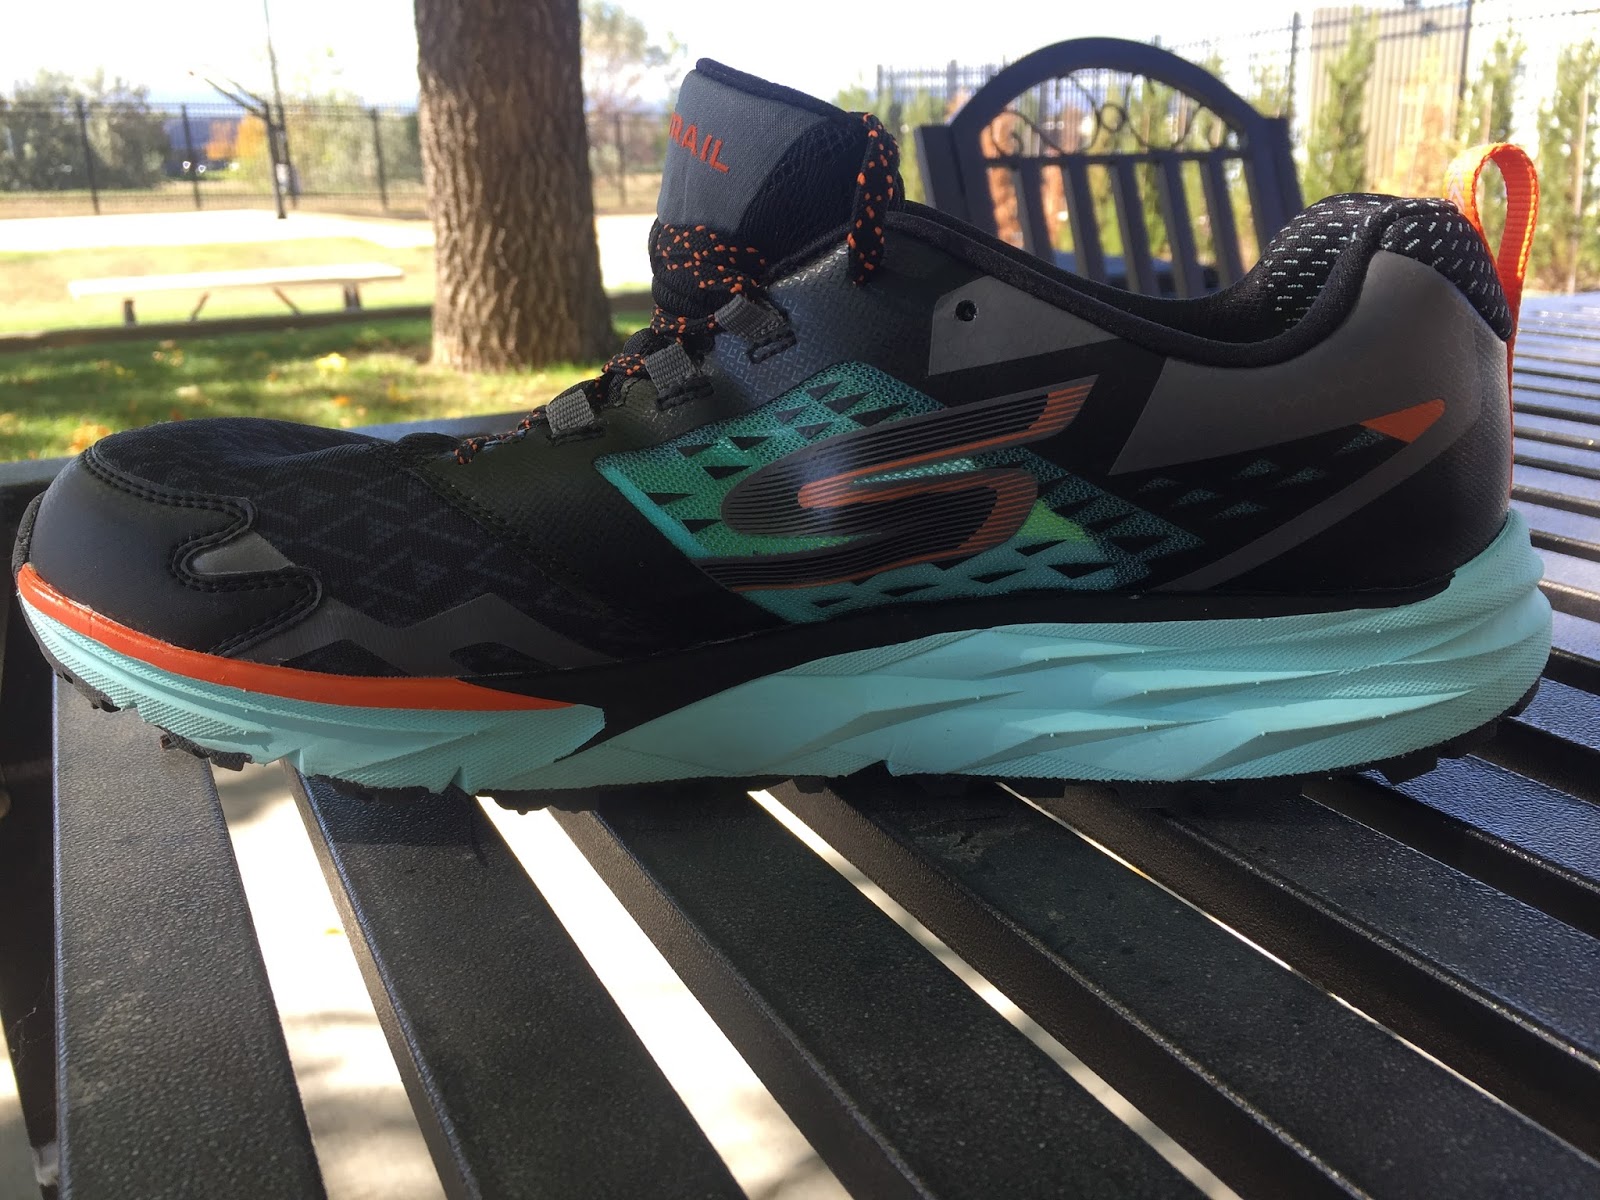 Road Trail Run: - Cushion and Comfort More Casual Trail Use